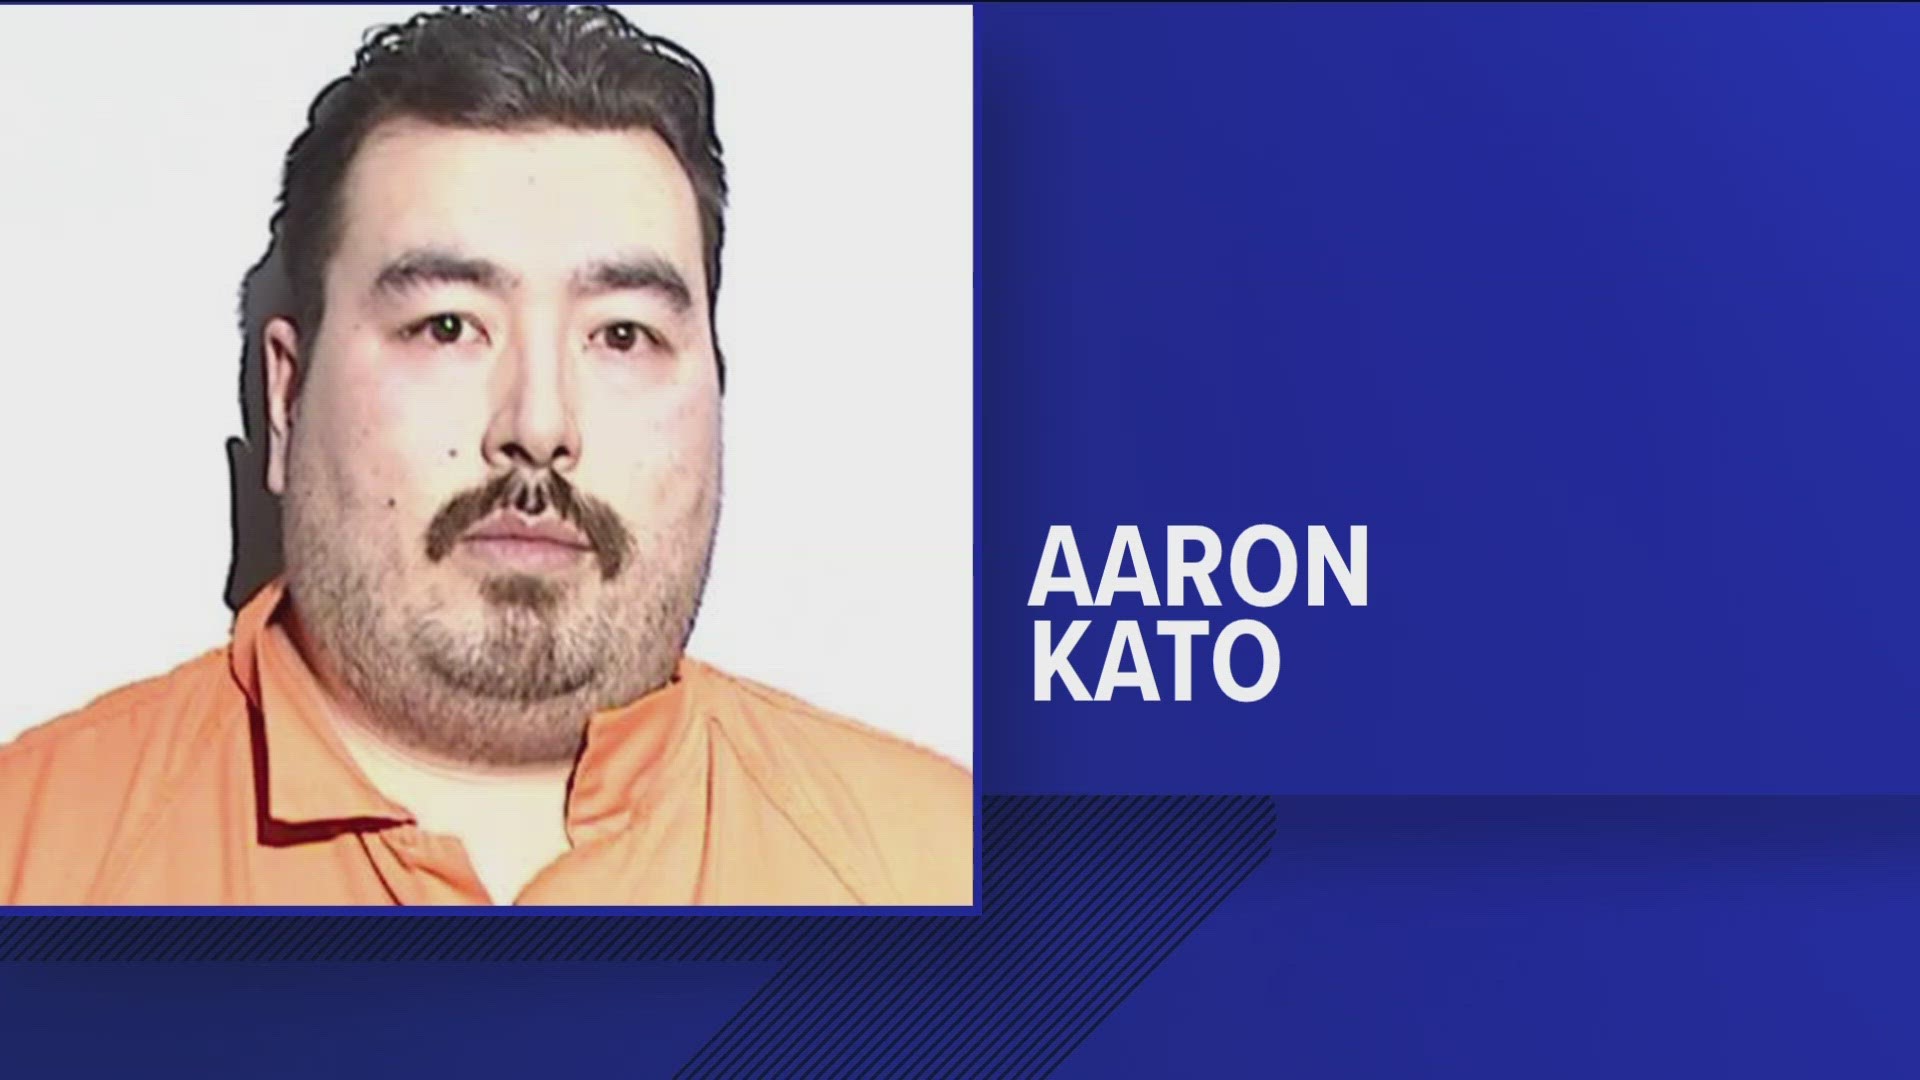 Aaron Kato is scheduled to appear before a judge for a pretrial on April 7 at 9 a.m.